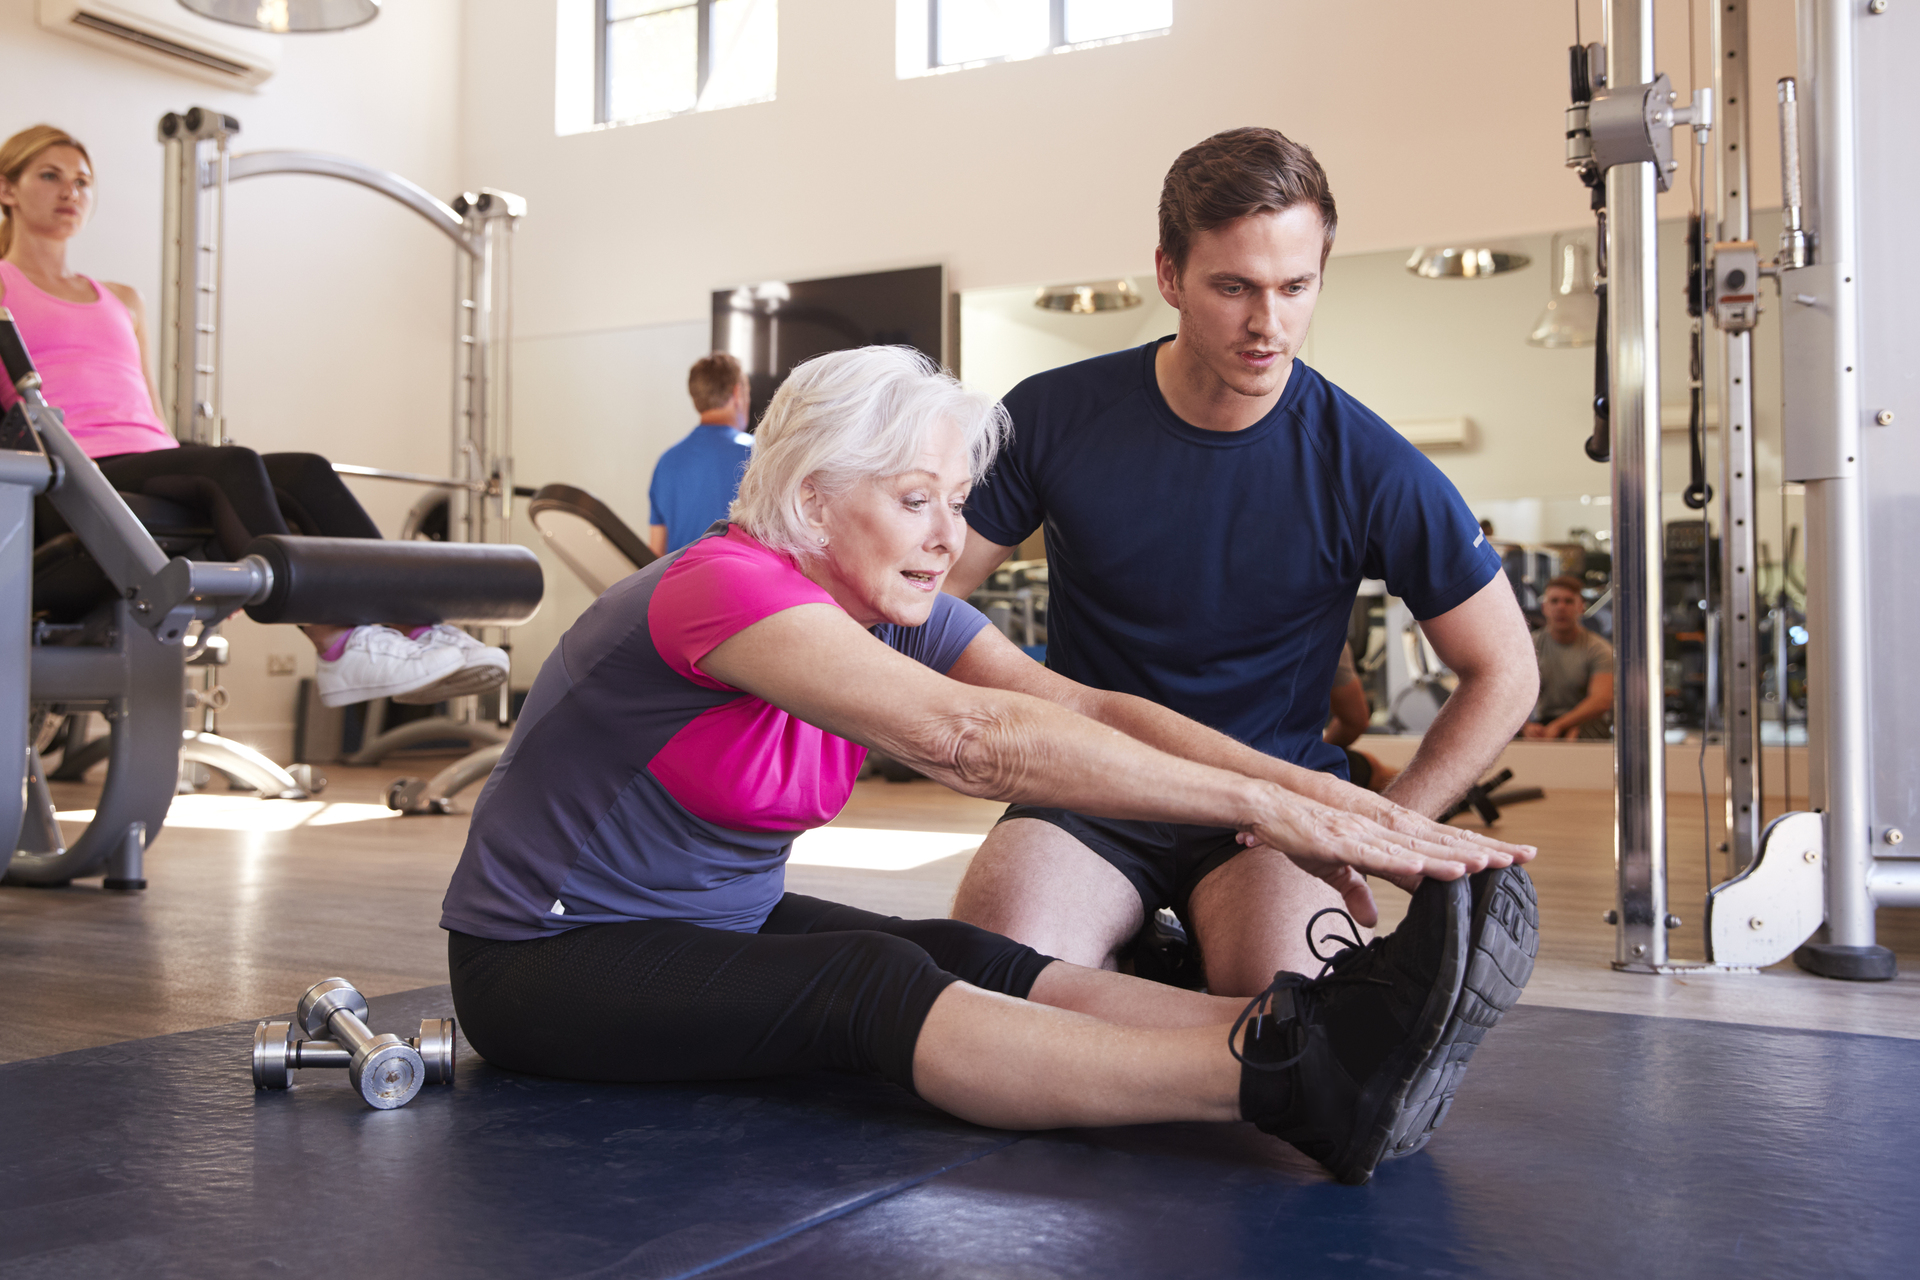 Work as Physical therapist online